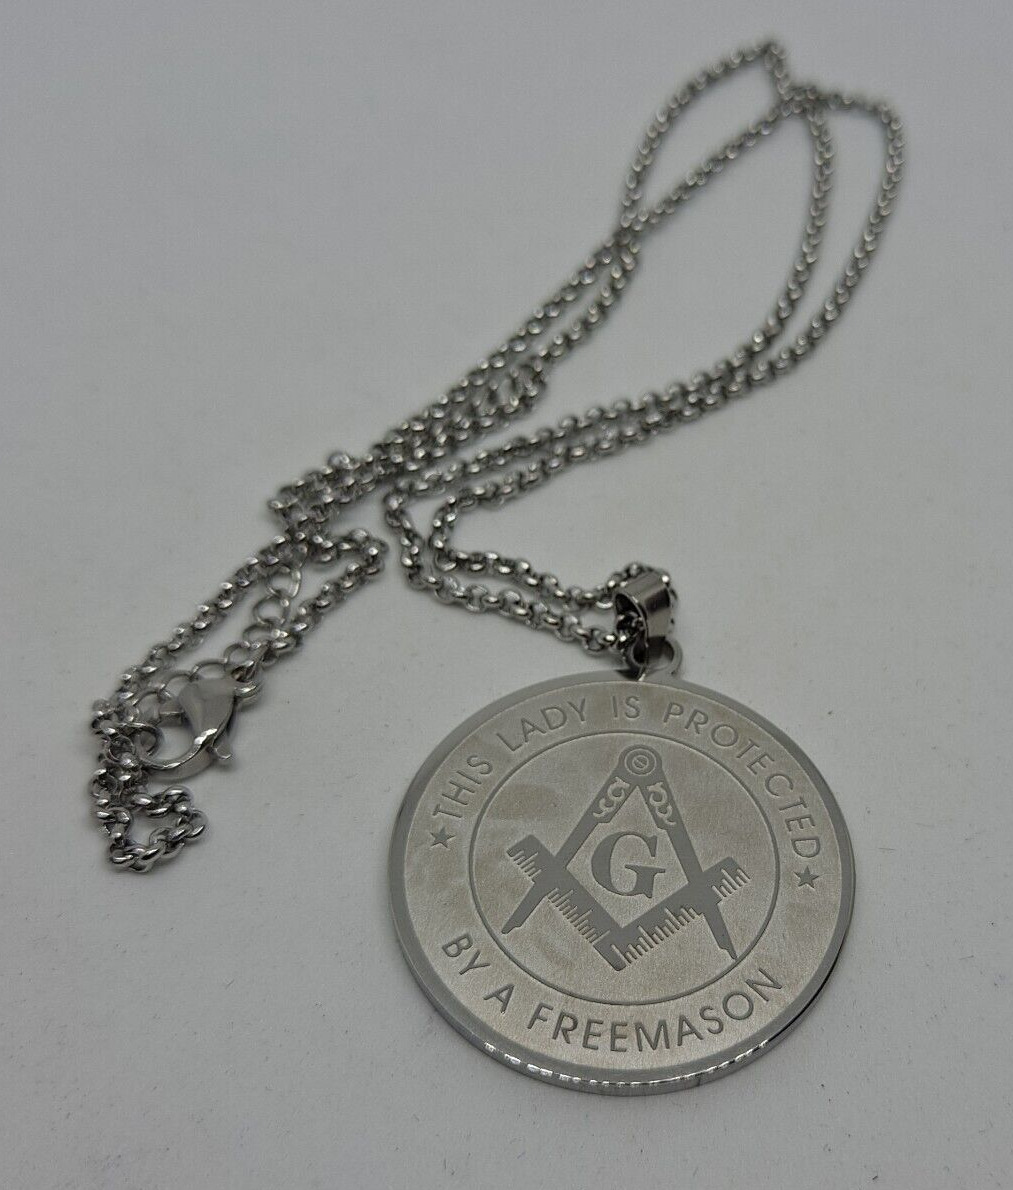 Masonic Necklace This Lady Is Protected By A Freemason eastern star